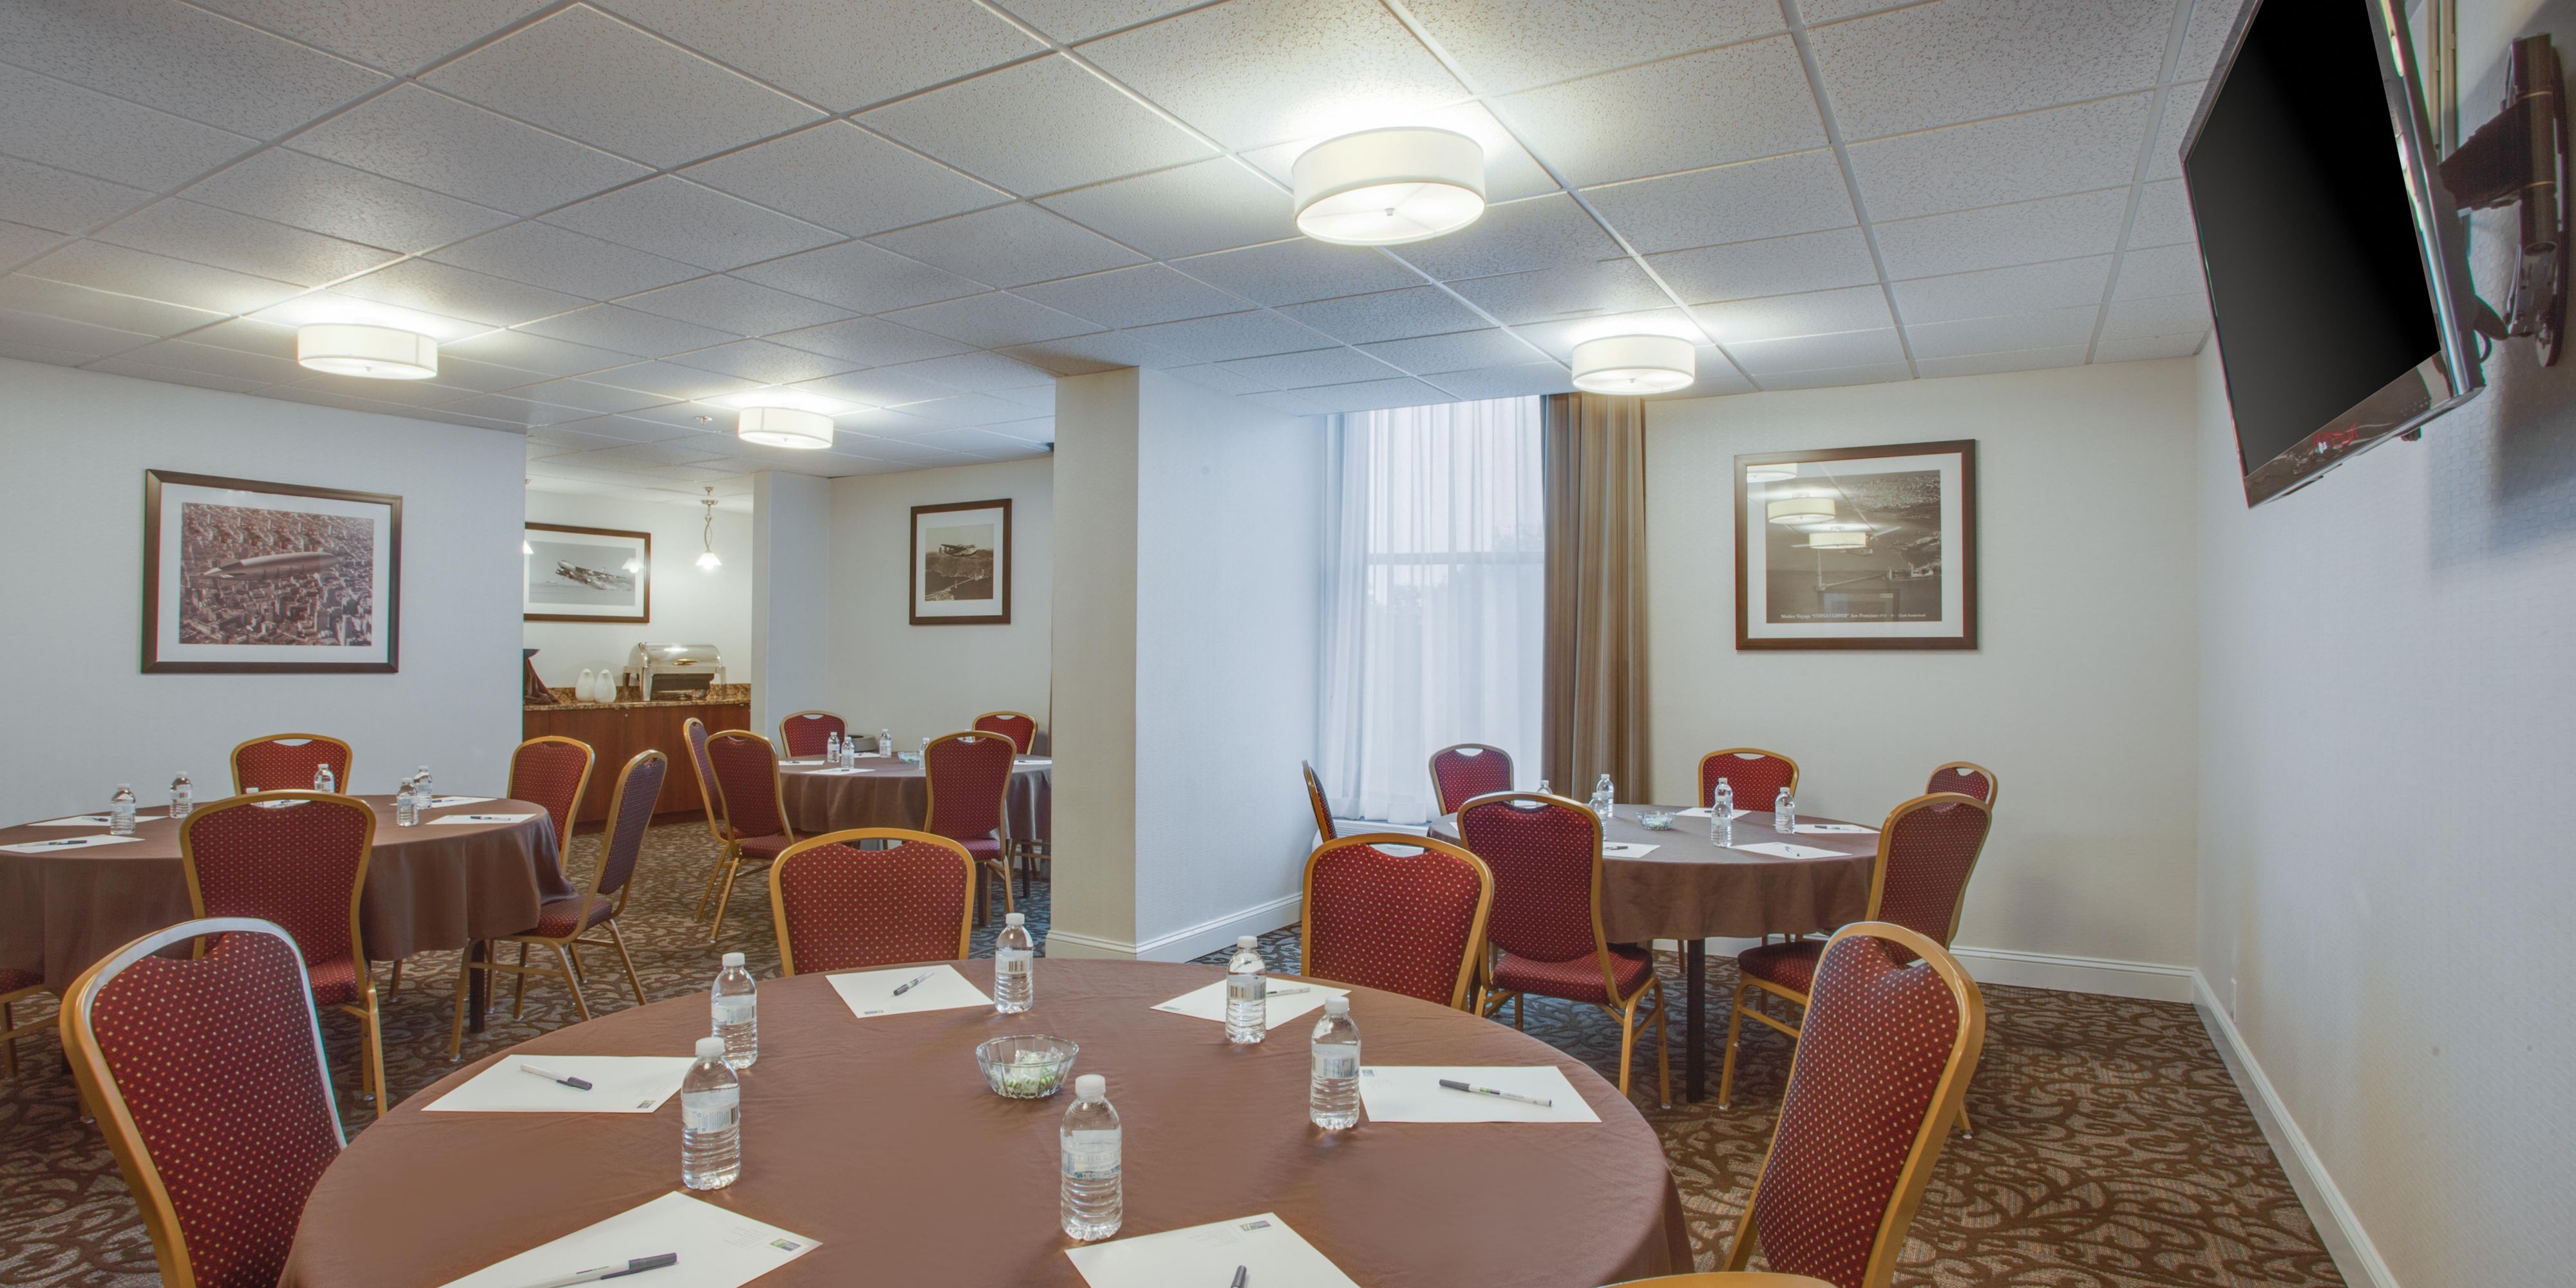 Book your meeting for 15-30 people in our intimate Andrews room. This space also includes a 46 inch television and a small catering space. Call to book now! 